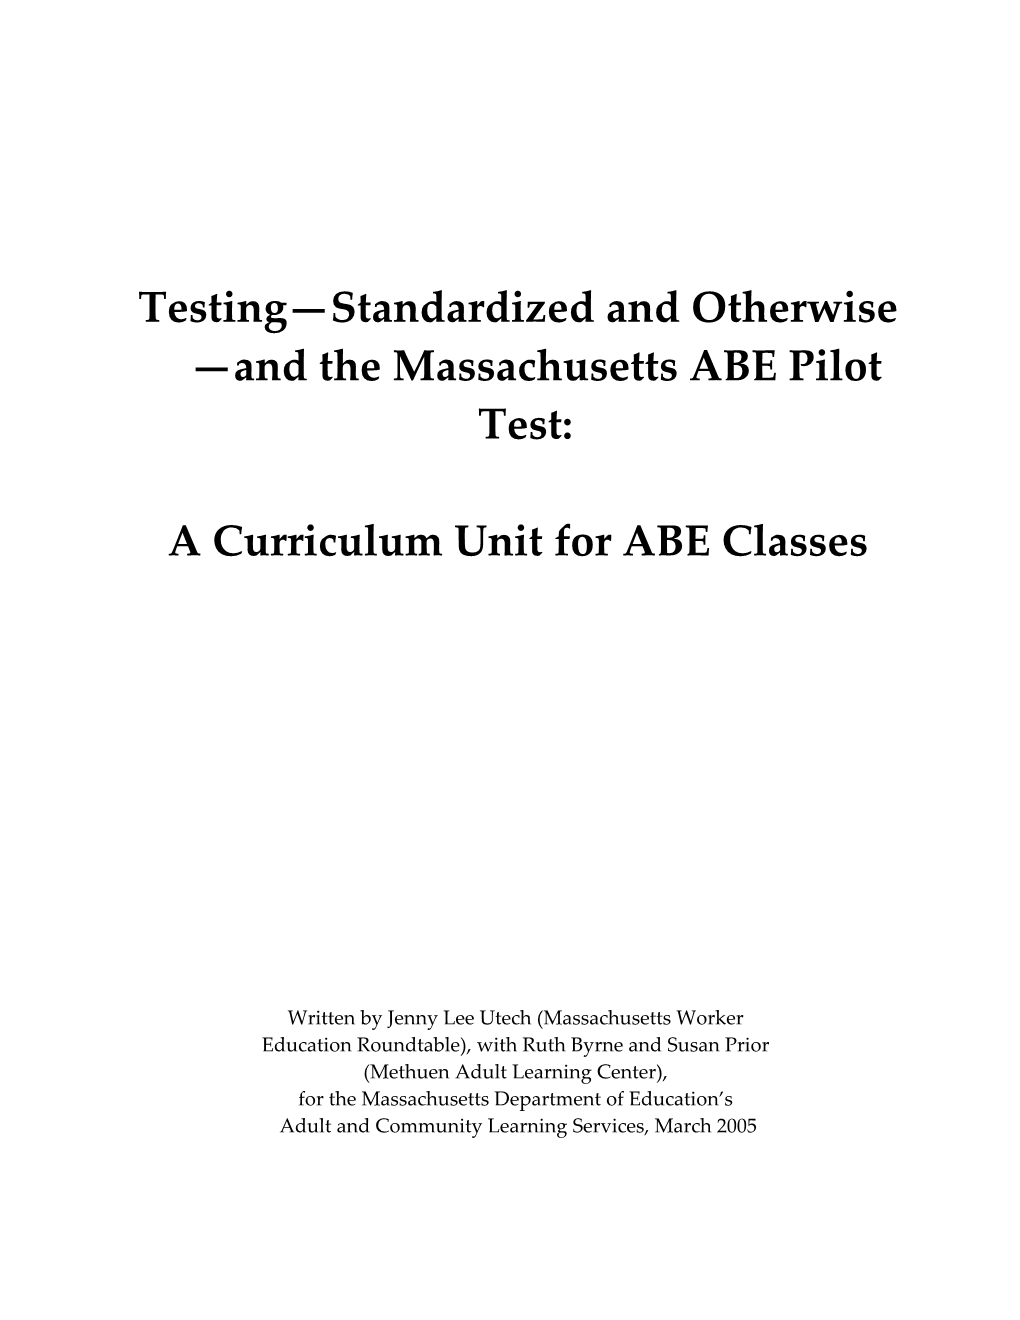 Testing - Standardized and Otherwise - and the MA ABE Pilot Test: a Curriculum Unit For